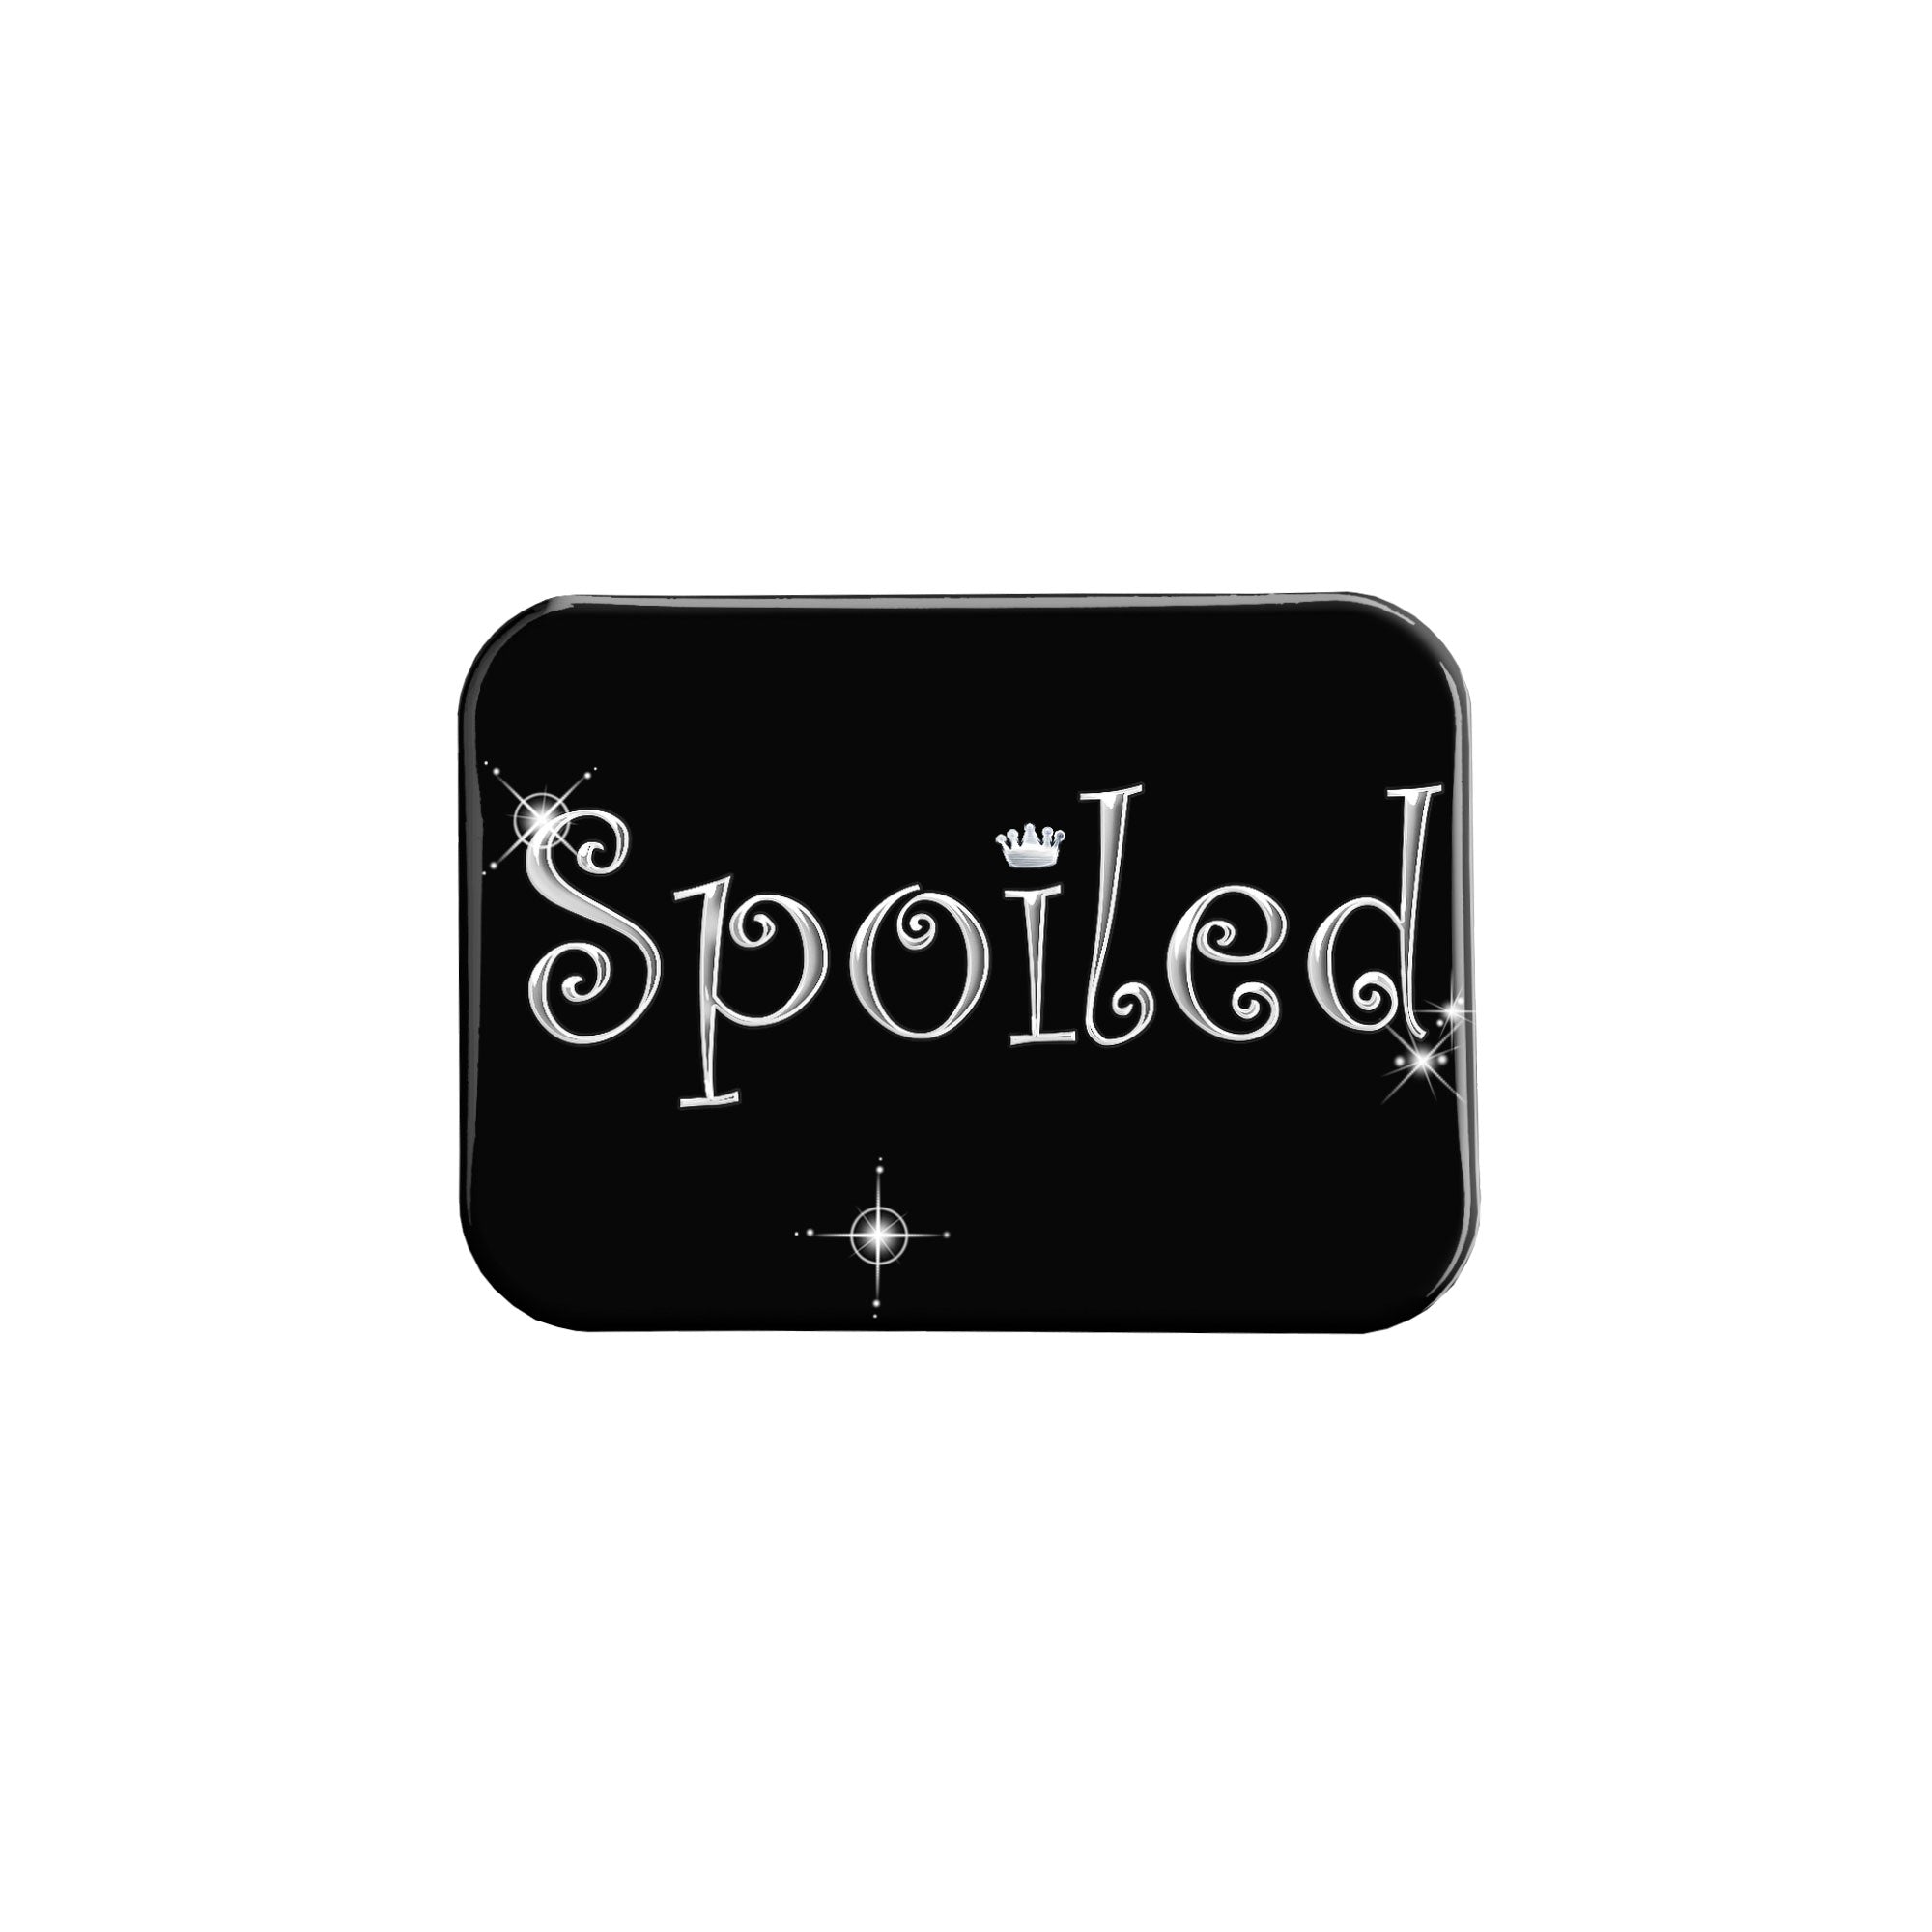 "Spoiled in Silver" - 2.5" X 3.5" Rectangle Fridge Magnets